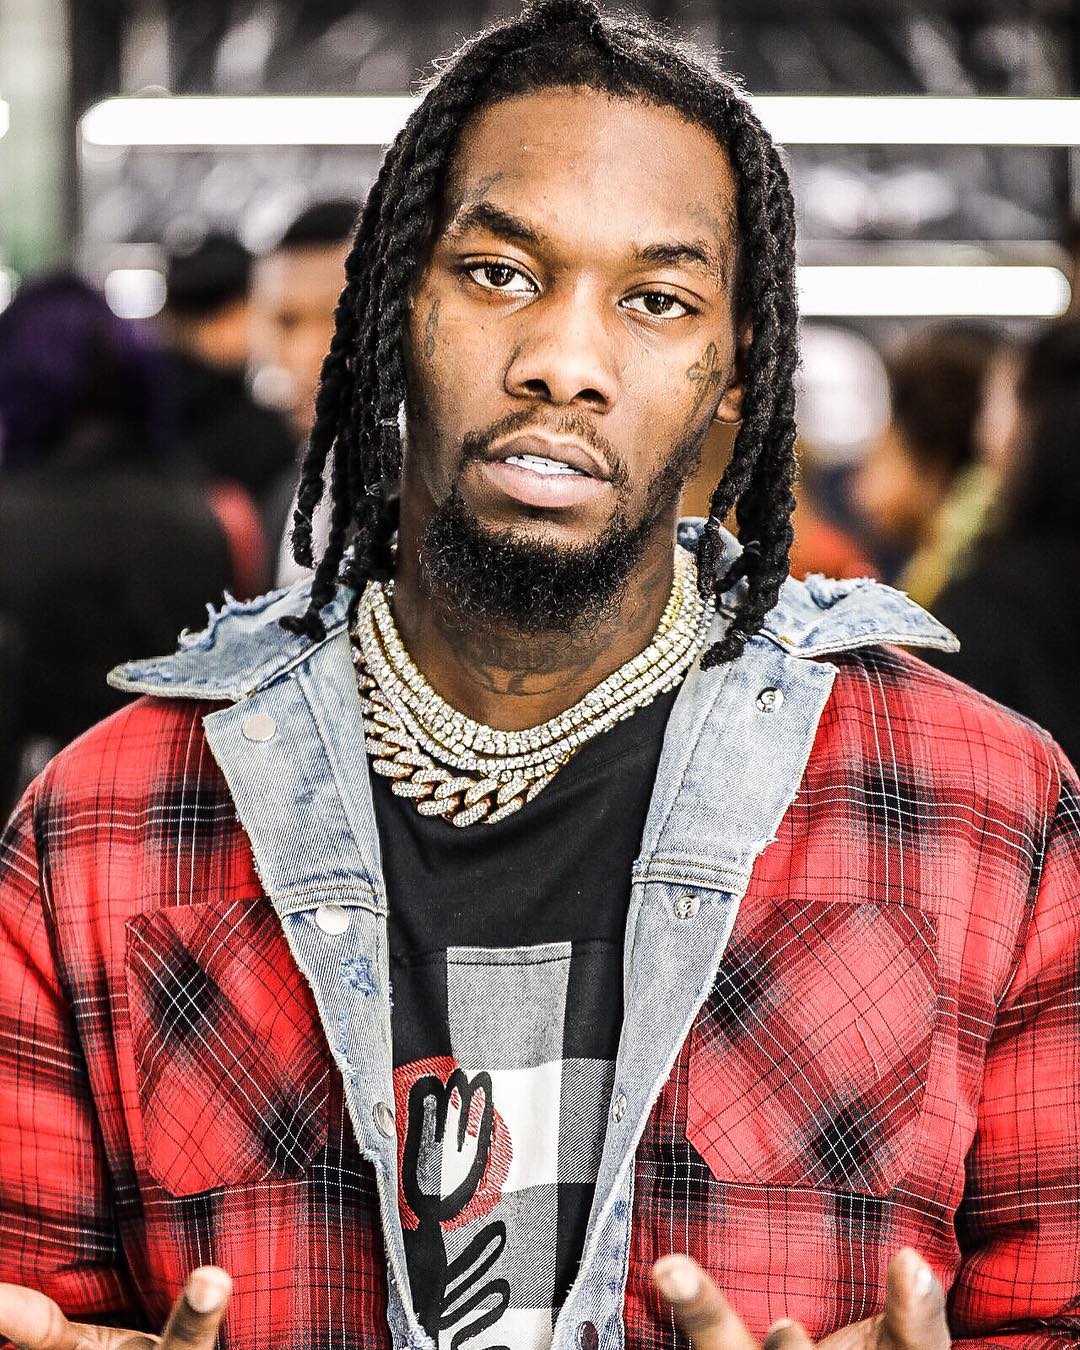 Offset: "I Cannot Vibe With Queers" - That Grape Juice